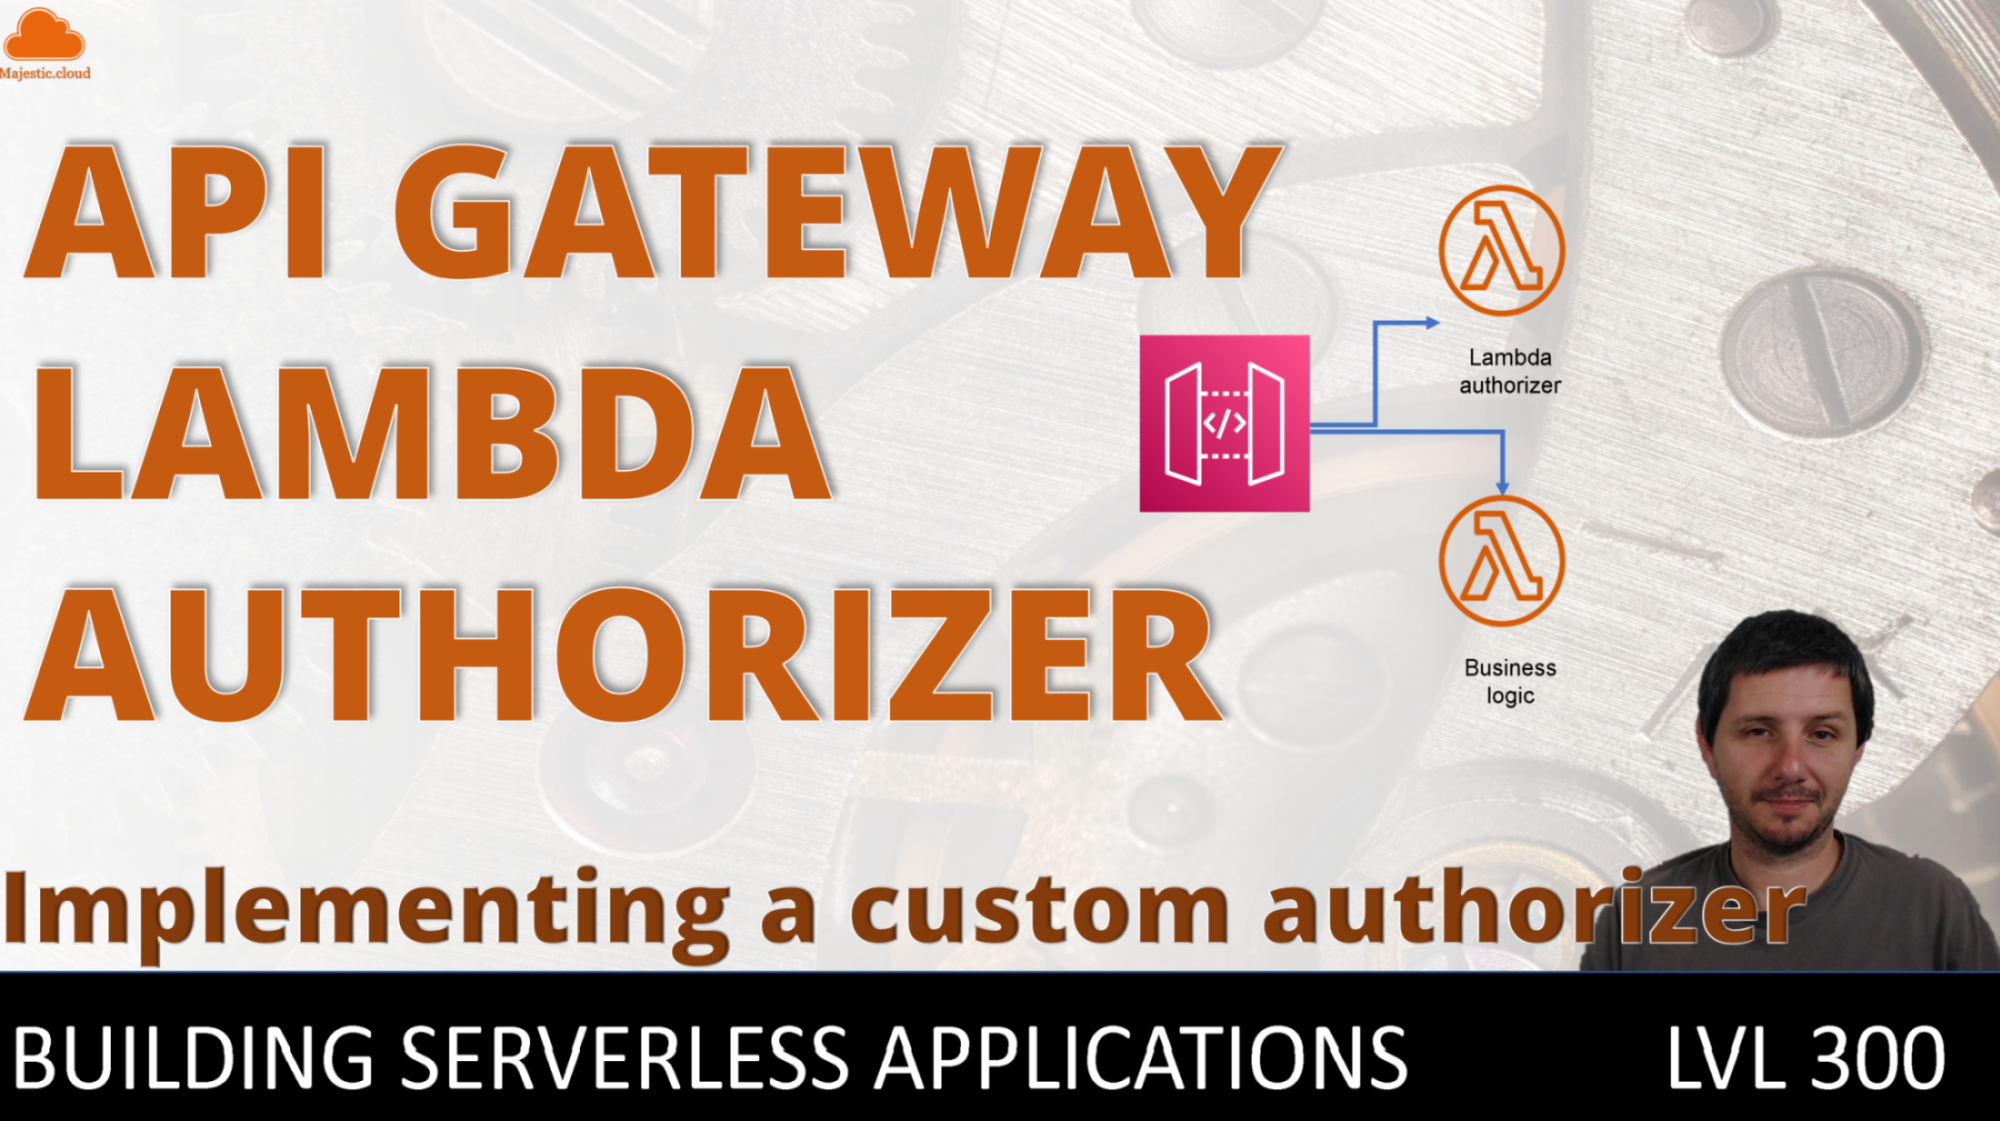 Secure API Gateway with a Lambda authorizer - Implementing a custom authorizer